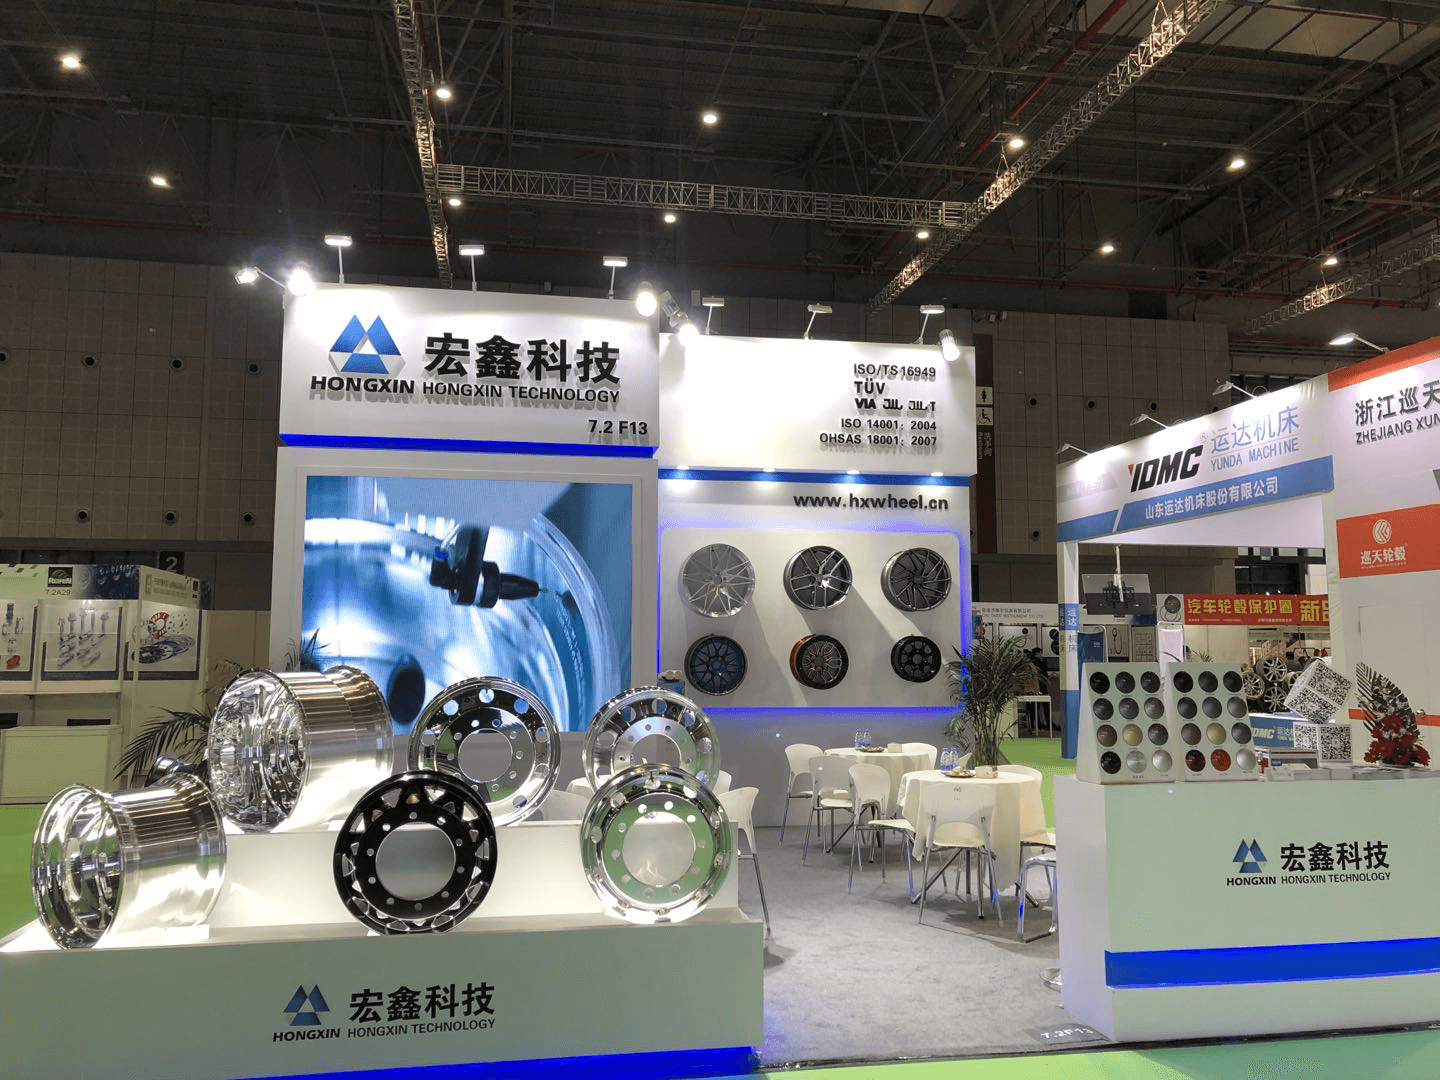 Once again, Hongxin Technology participated in Automechanika Shanghai 2020